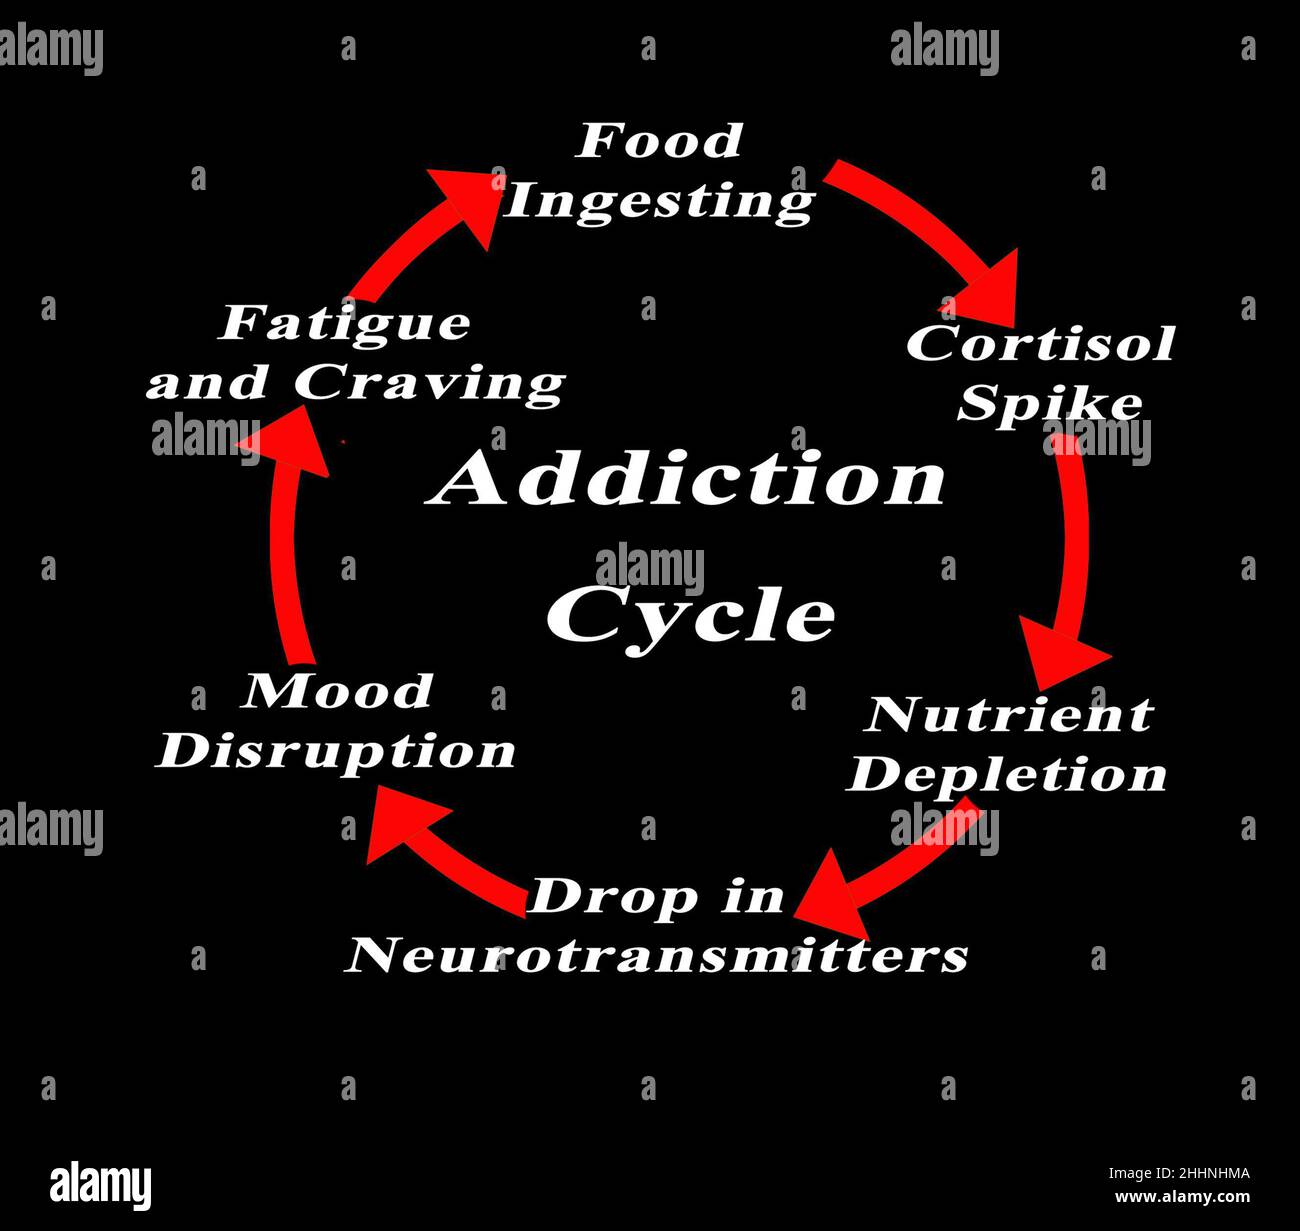 Six Components of Addiction Cycle Stock Photo - Alamy